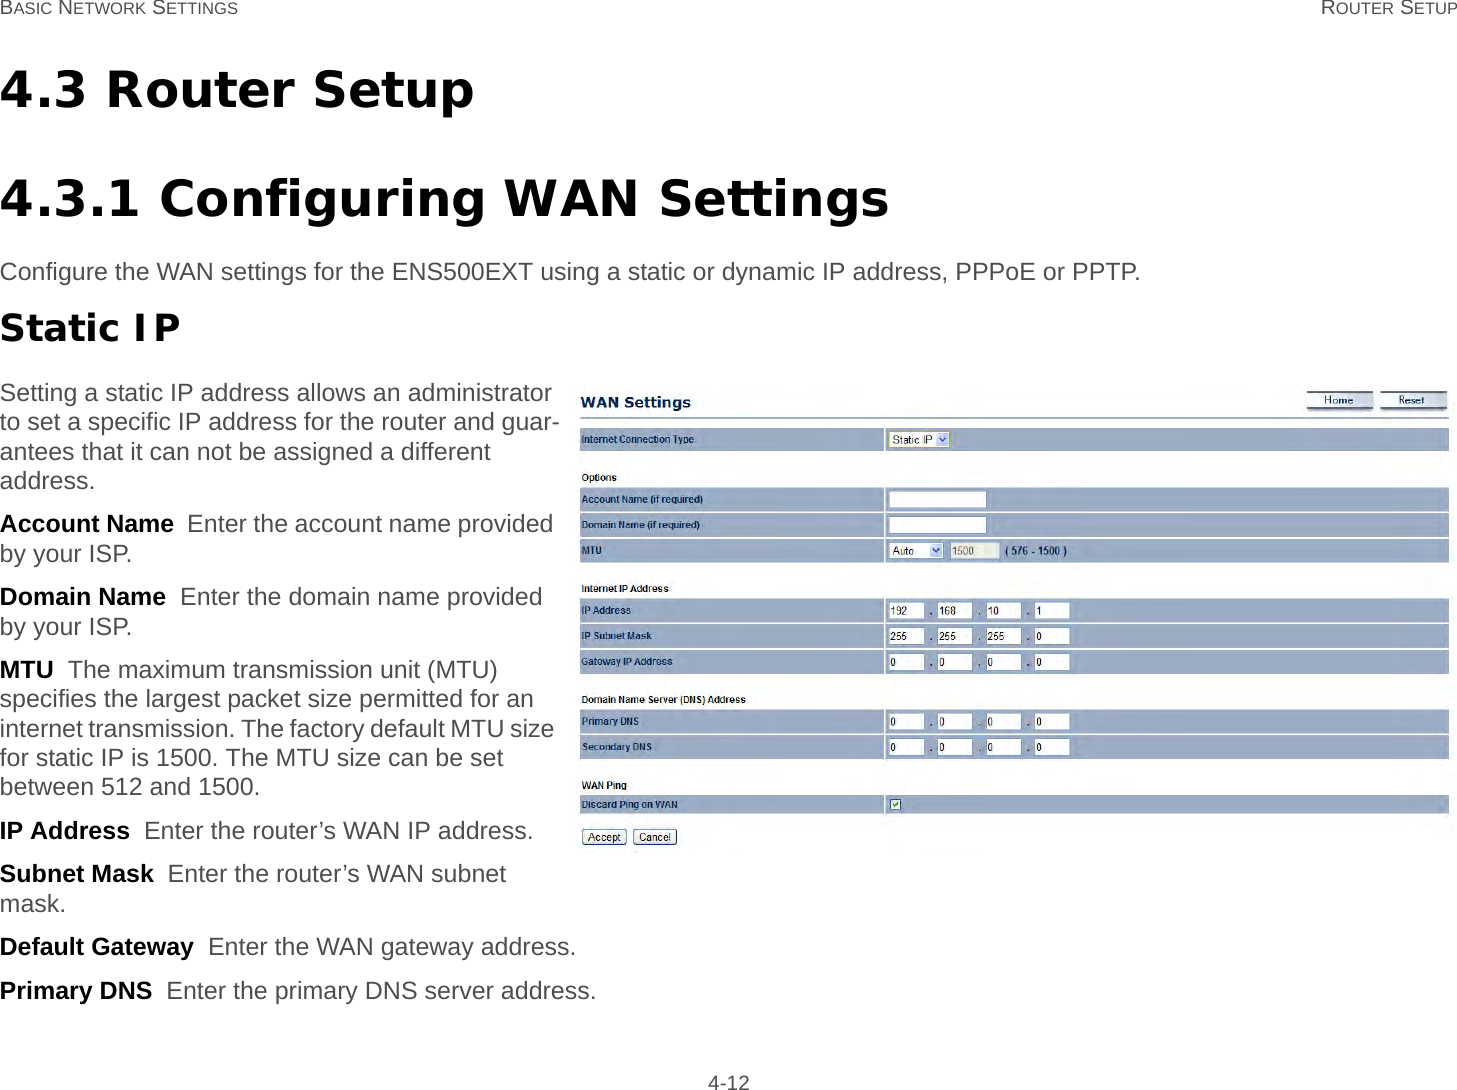 BASIC NETWORK SETTINGS ROUTER SETUP 4-124.3 Router Setup4.3.1 Configuring WAN SettingsConfigure the WAN settings for the ENS500EXT using a static or dynamic IP address, PPPoE or PPTP.Static IPSetting a static IP address allows an administrator to set a specific IP address for the router and guar-antees that it can not be assigned a different address.Account Name  Enter the account name provided by your ISP.Domain Name  Enter the domain name provided by your ISP.MTU  The maximum transmission unit (MTU) specifies the largest packet size permitted for an internet transmission. The factory default MTU size for static IP is 1500. The MTU size can be set between 512 and 1500.IP Address  Enter the router’s WAN IP address.Subnet Mask  Enter the router’s WAN subnet mask.Default Gateway  Enter the WAN gateway address.Primary DNS  Enter the primary DNS server address.